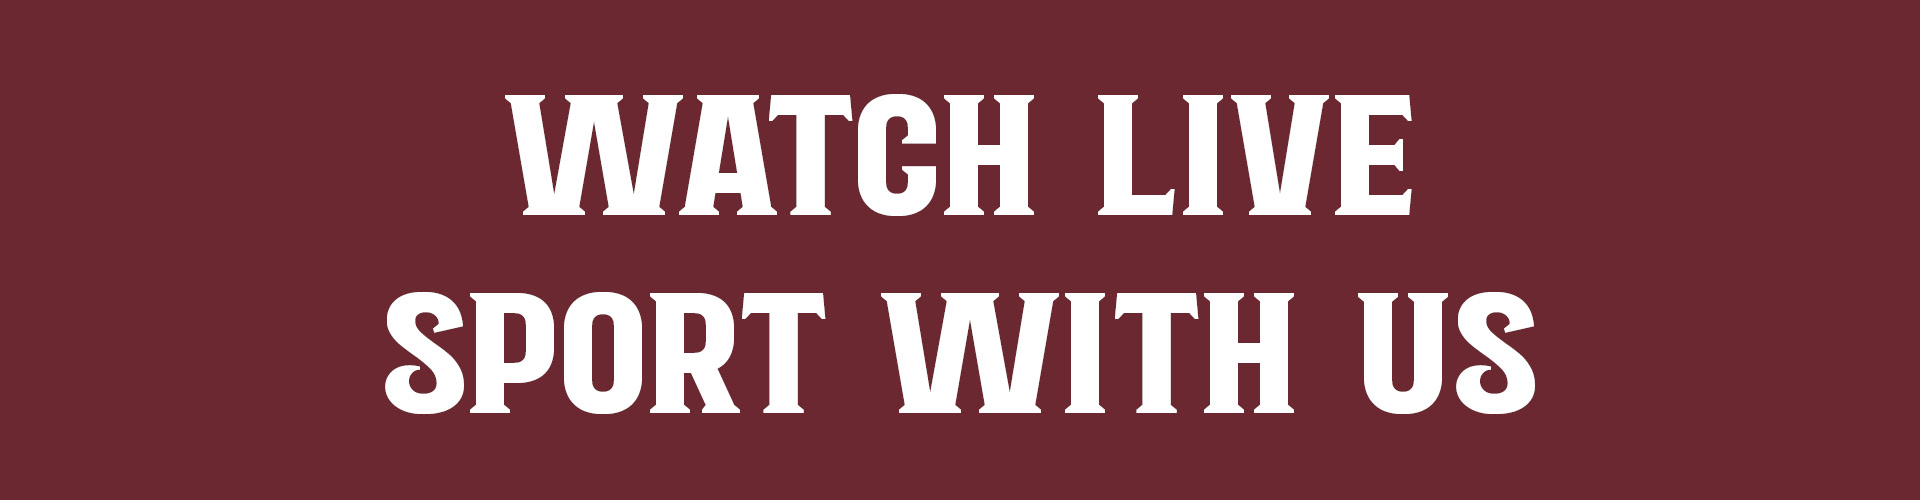 Watch Live Sport at your local Great UK Pub